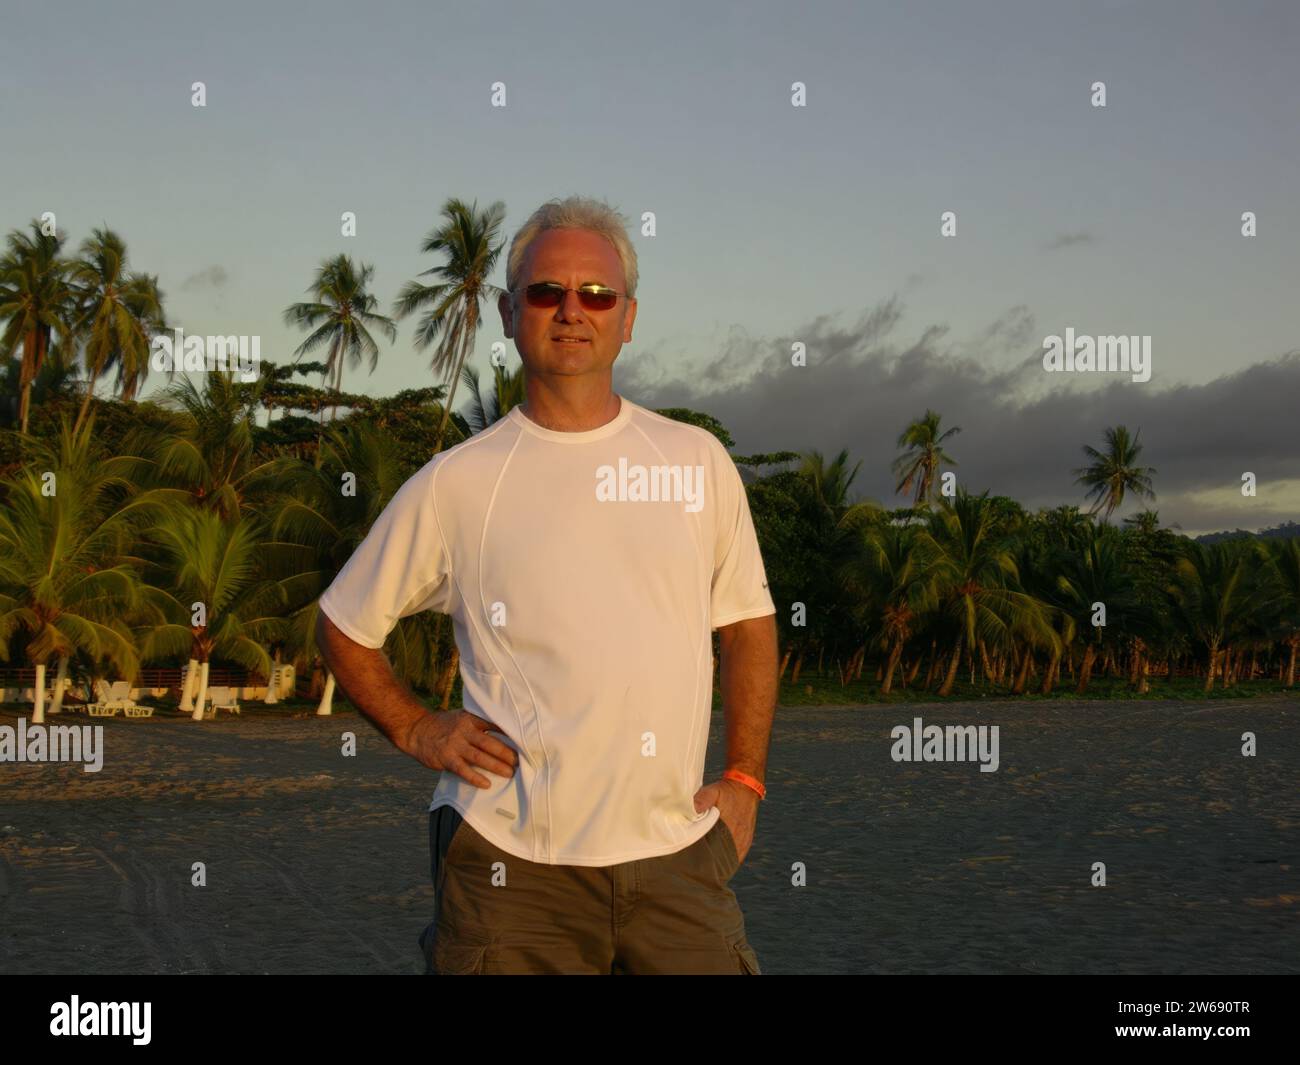 Portrait of a smiling man wearing sunglasses standing on a beach on West Coast of Costa Rica Stock Photo